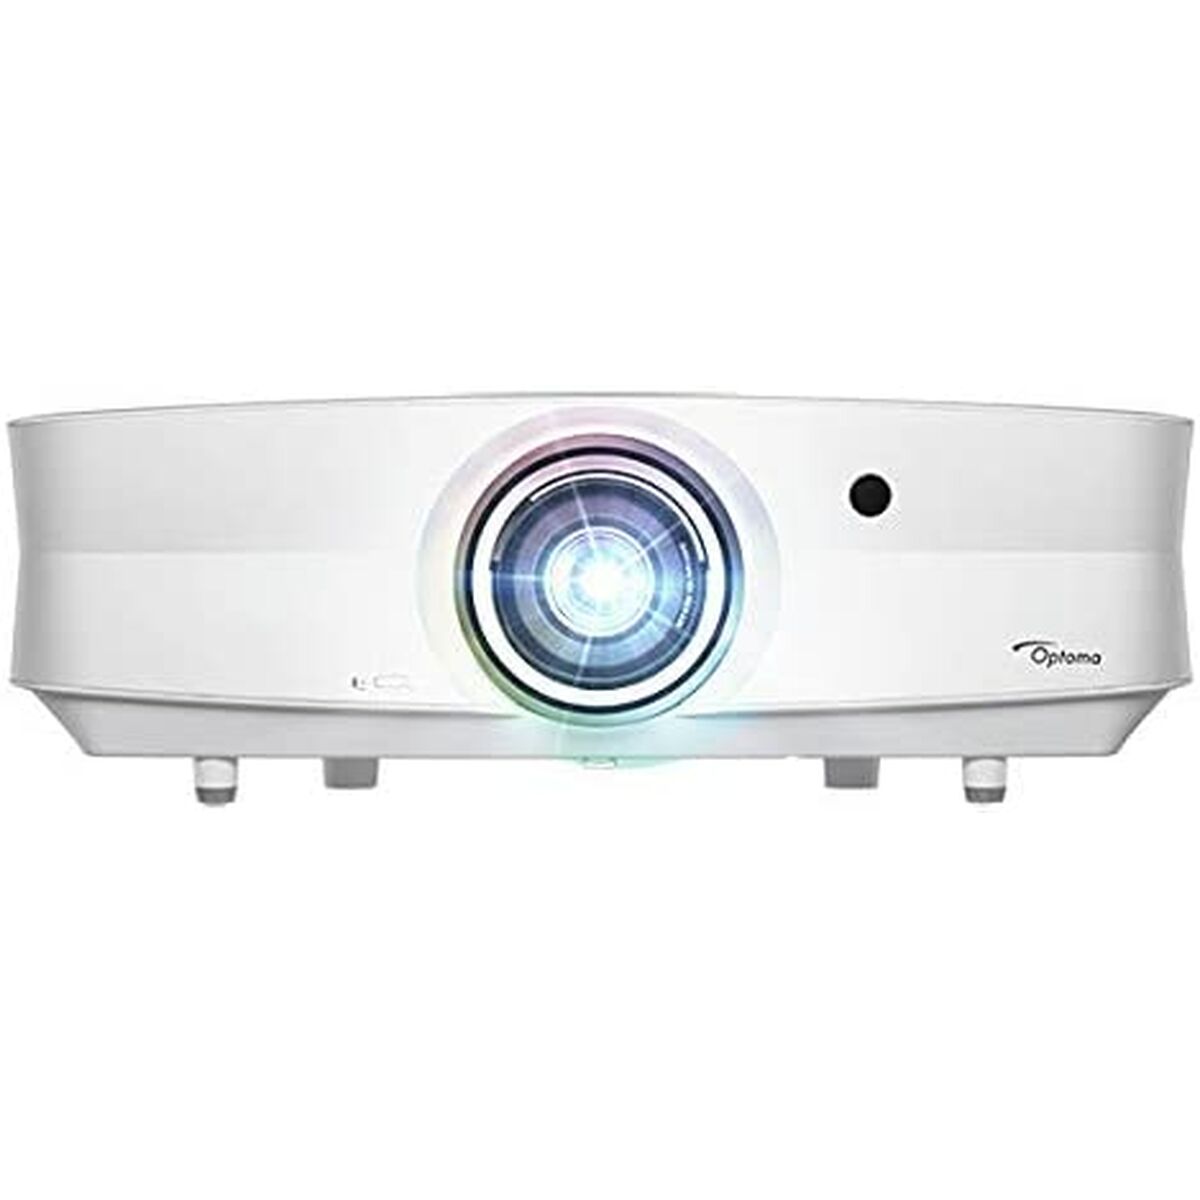 Projector Optoma UHZ65LV 5000 Lm, Optoma, Electronics, TV, Video and home cinema, projector-optoma-uhz65lv-5000-lm, Brand_Optoma, category-reference-2609, category-reference-2642, category-reference-2947, category-reference-t-18805, category-reference-t-19653, cinema and television, computers / peripherals, Condition_NEW, entertainment, office, Price_+ 1000, RiotNook